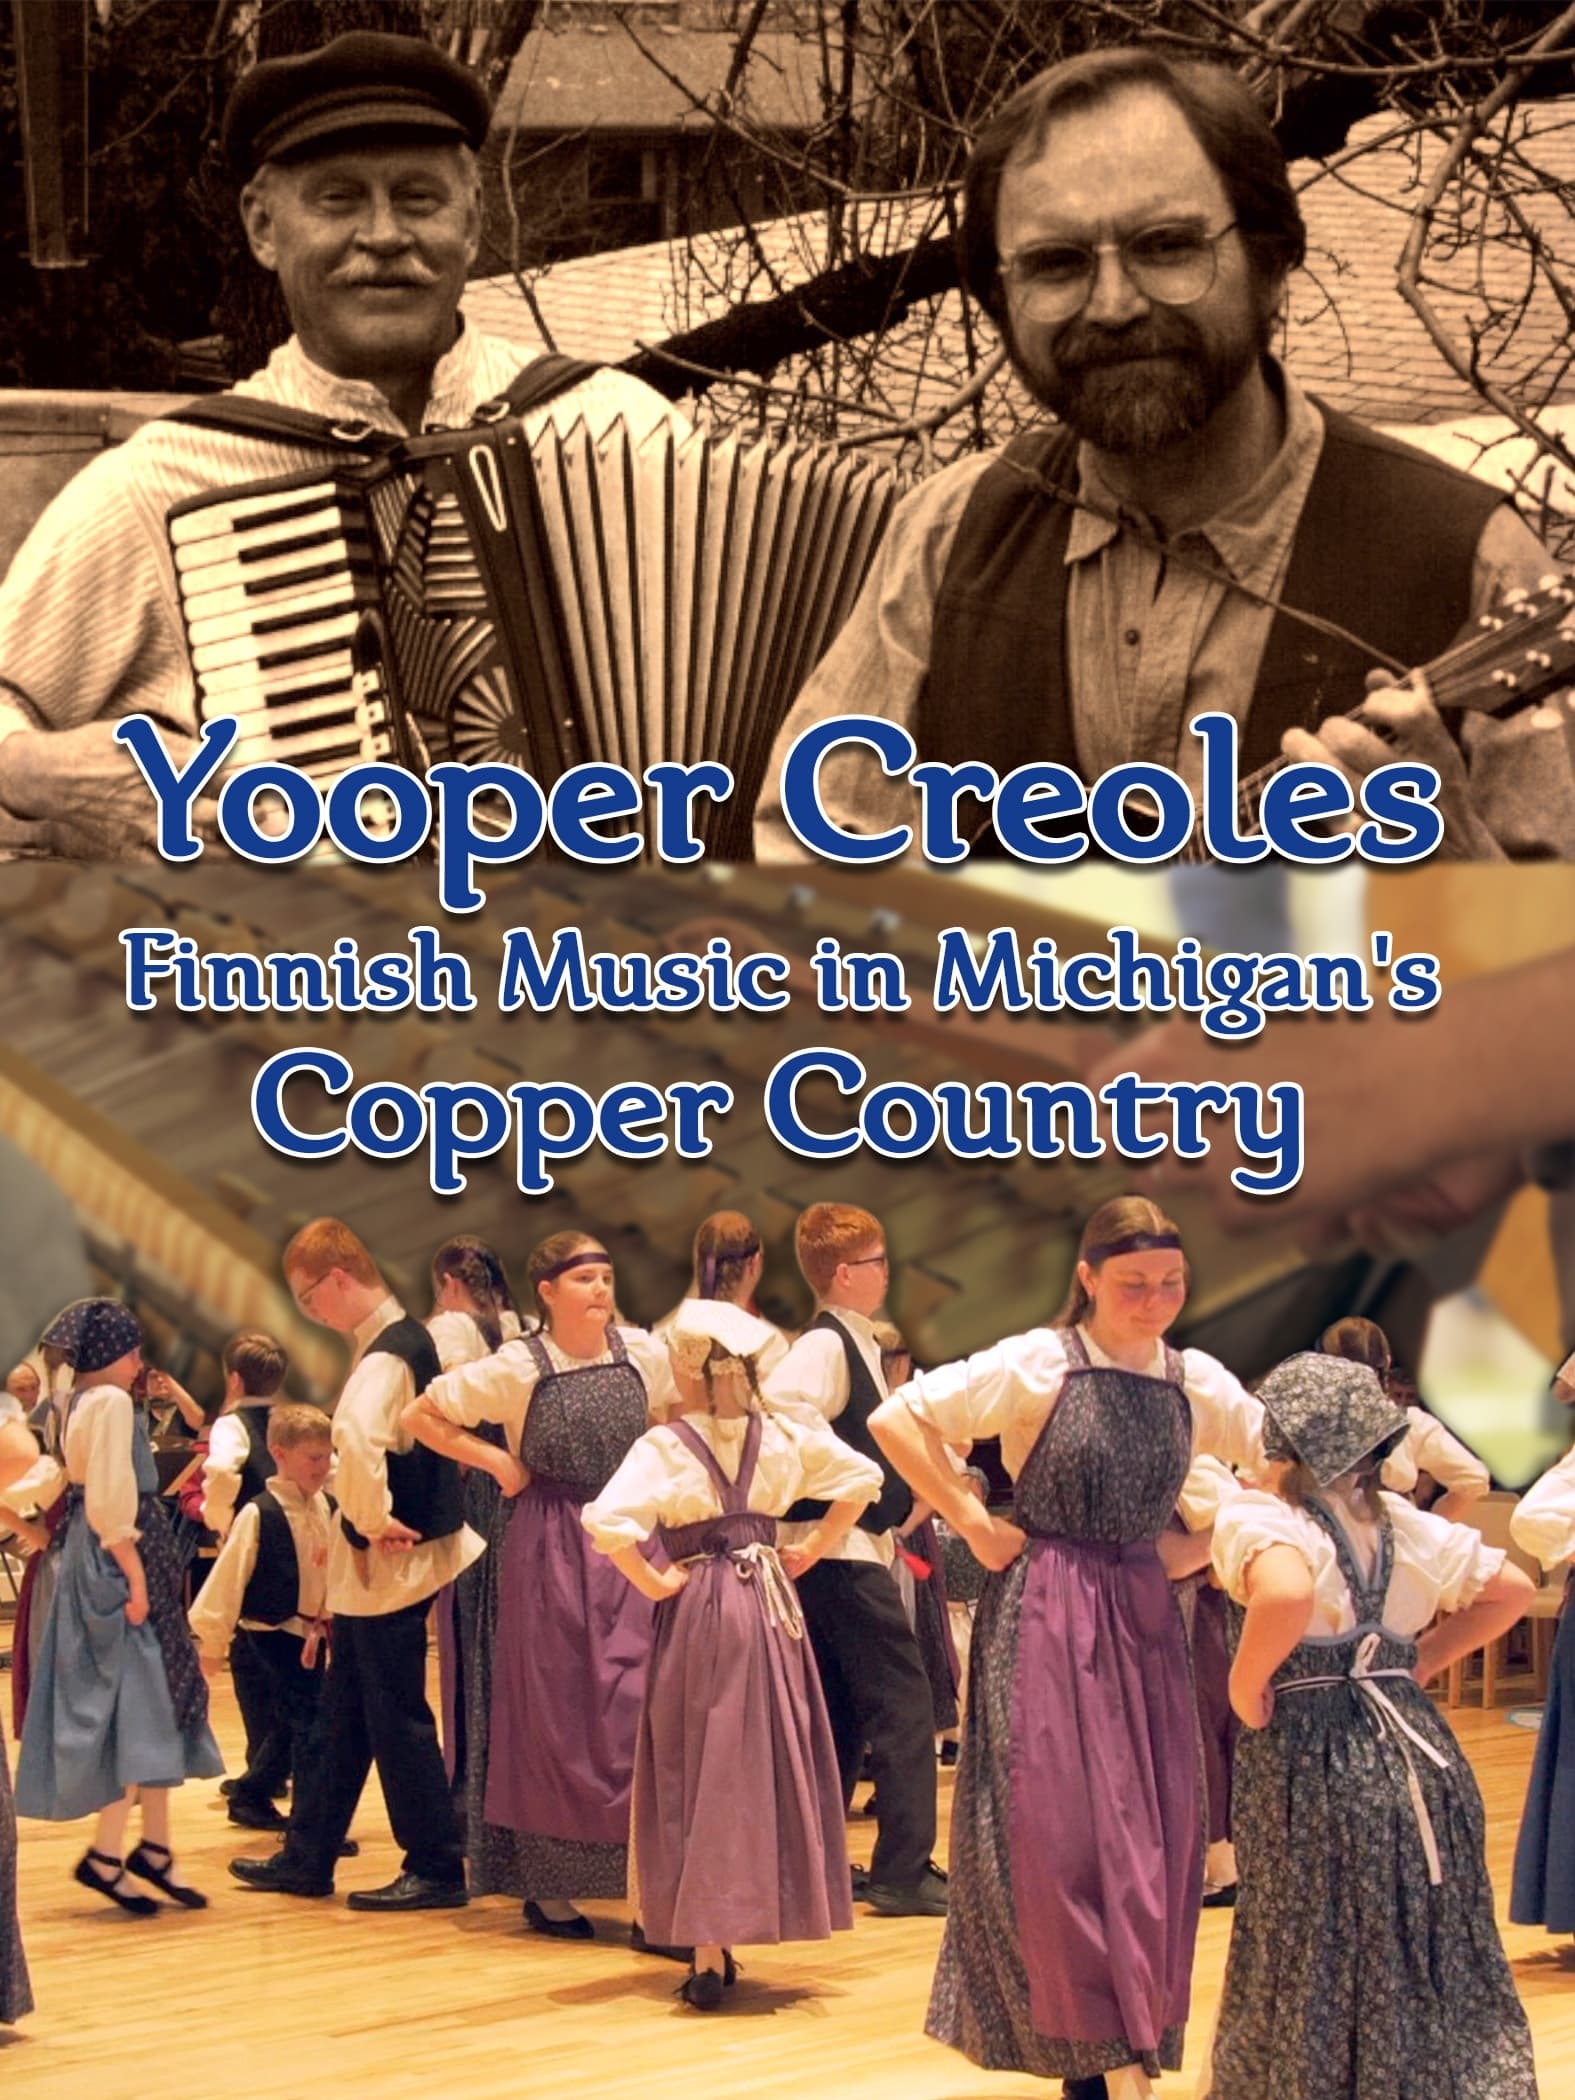 Yooper Creoles: Finnish Music in Michigan's Copper Country